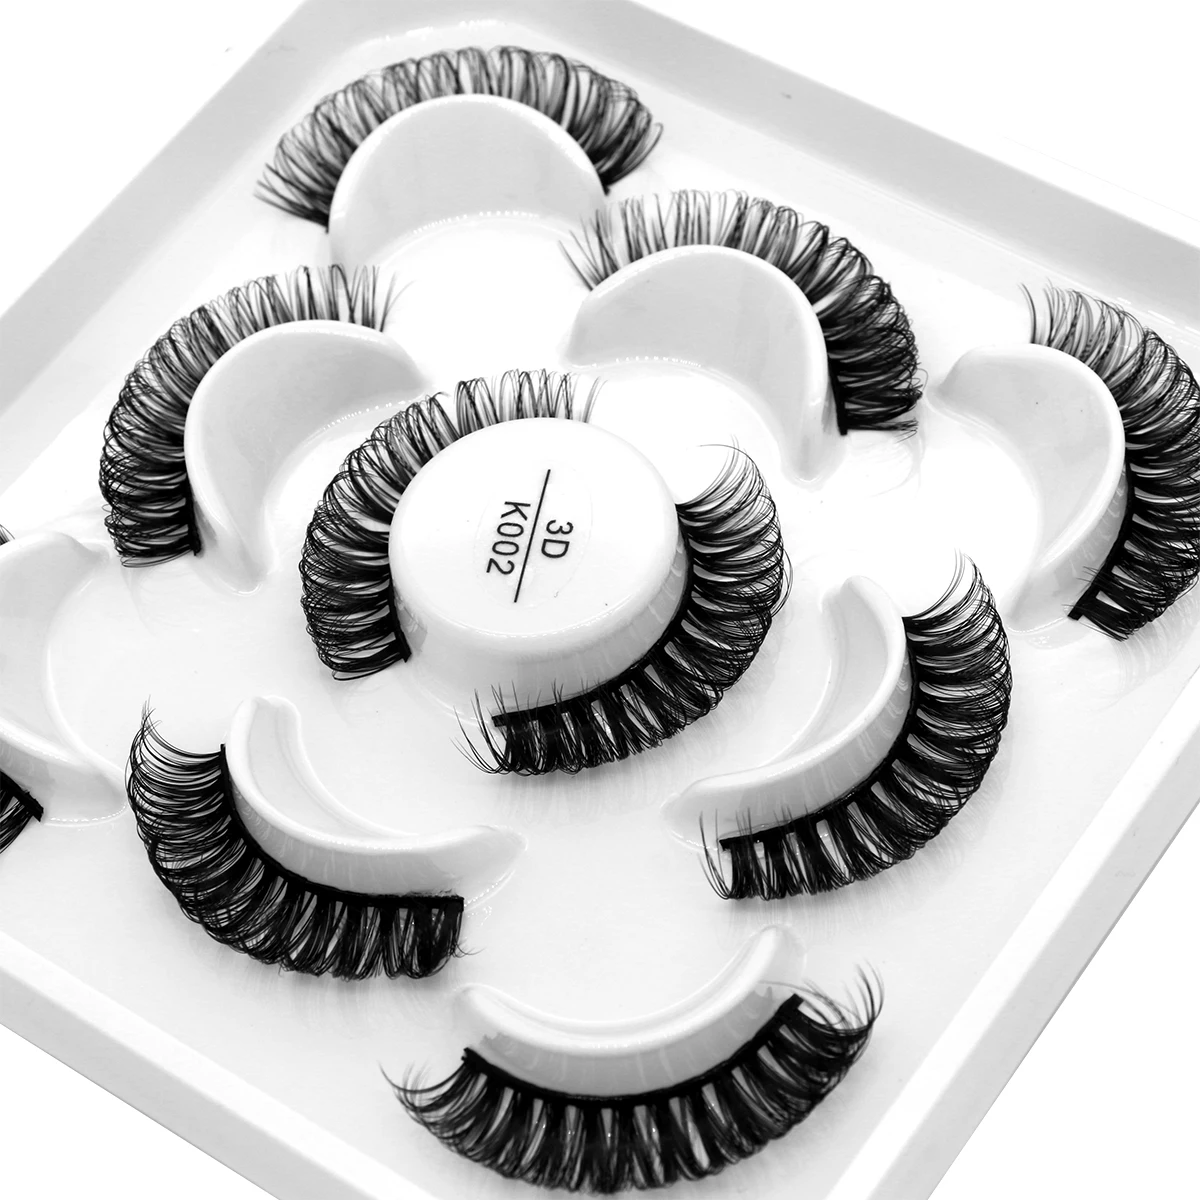 Russian Strip Lashes DD Curl Lashes 5 Pairs Faux Mink Lashes 3D Mink Eyelashes Reusable Fluffy False Lashes russian extensions